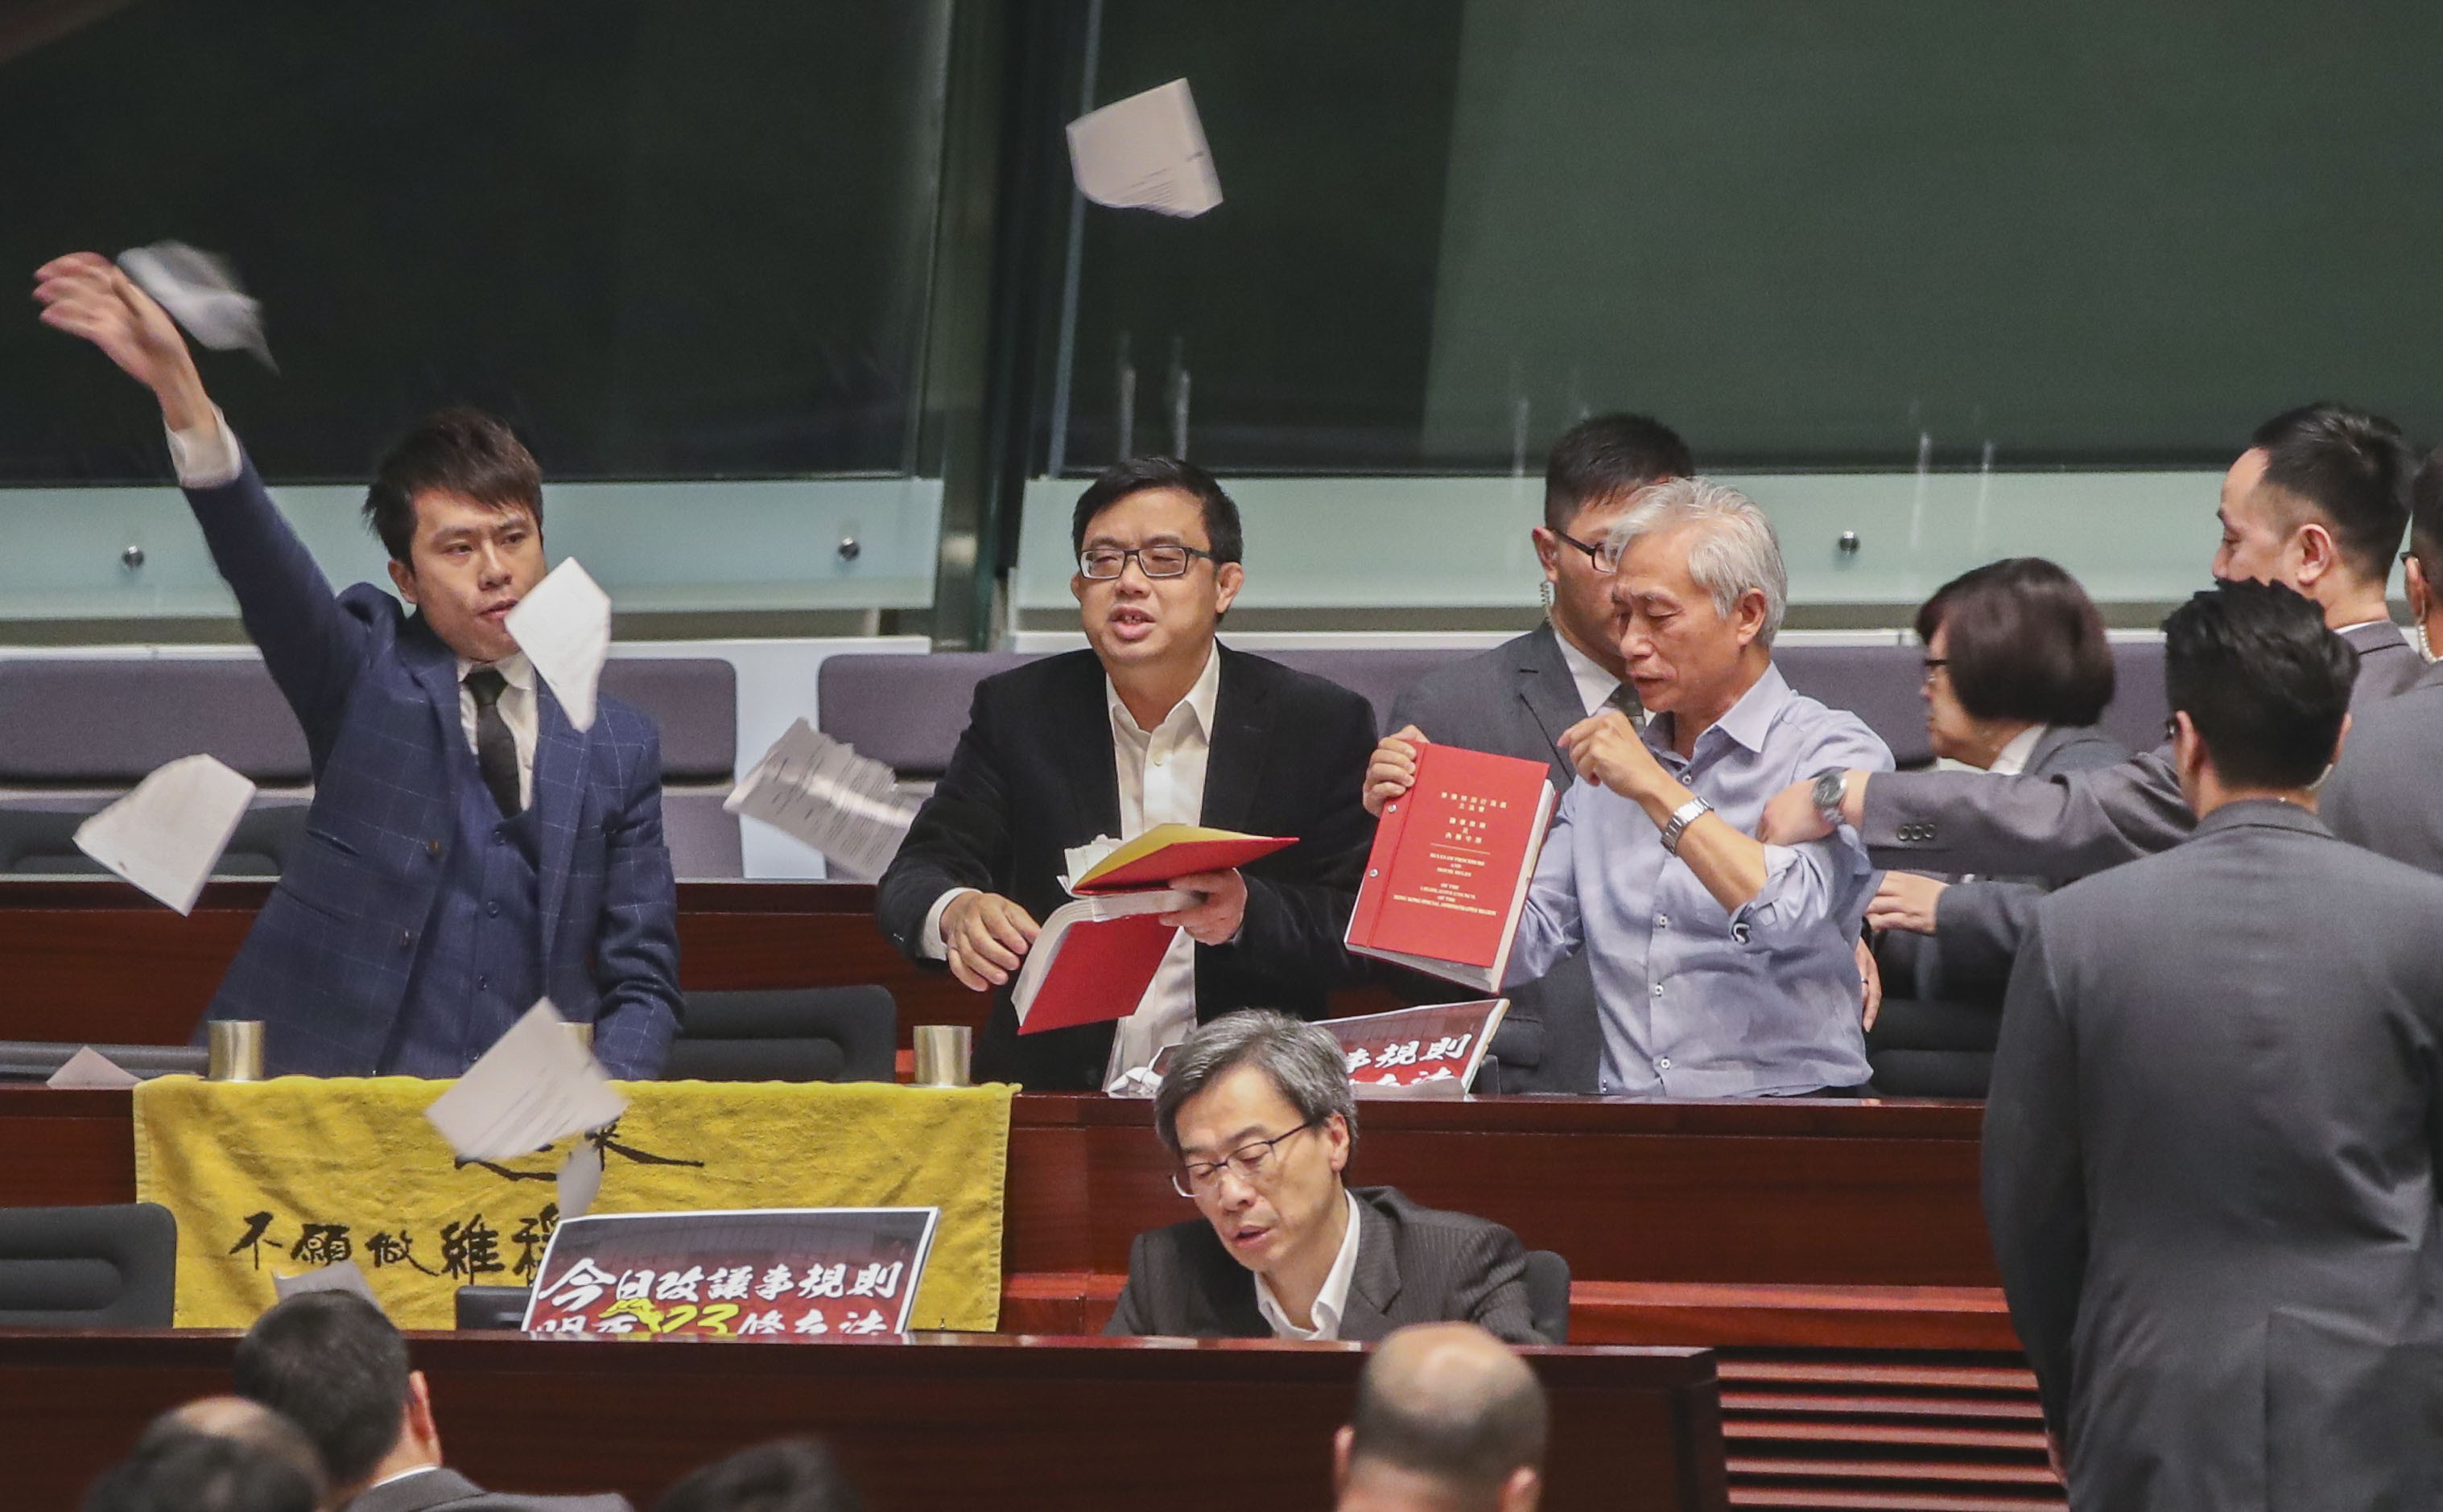 Lawmakers (from left) Roy Kwong Chun-yu and James To Kun-sun of the Democratic Party, and Leung Yiu-chung, tear up the Rules of Procedures and House Rules of the Legislative Council and throw the pages in the air, during a debate on the proposed amendment to the rules of Legco meetings, on December 15. Photo: Edward Wong